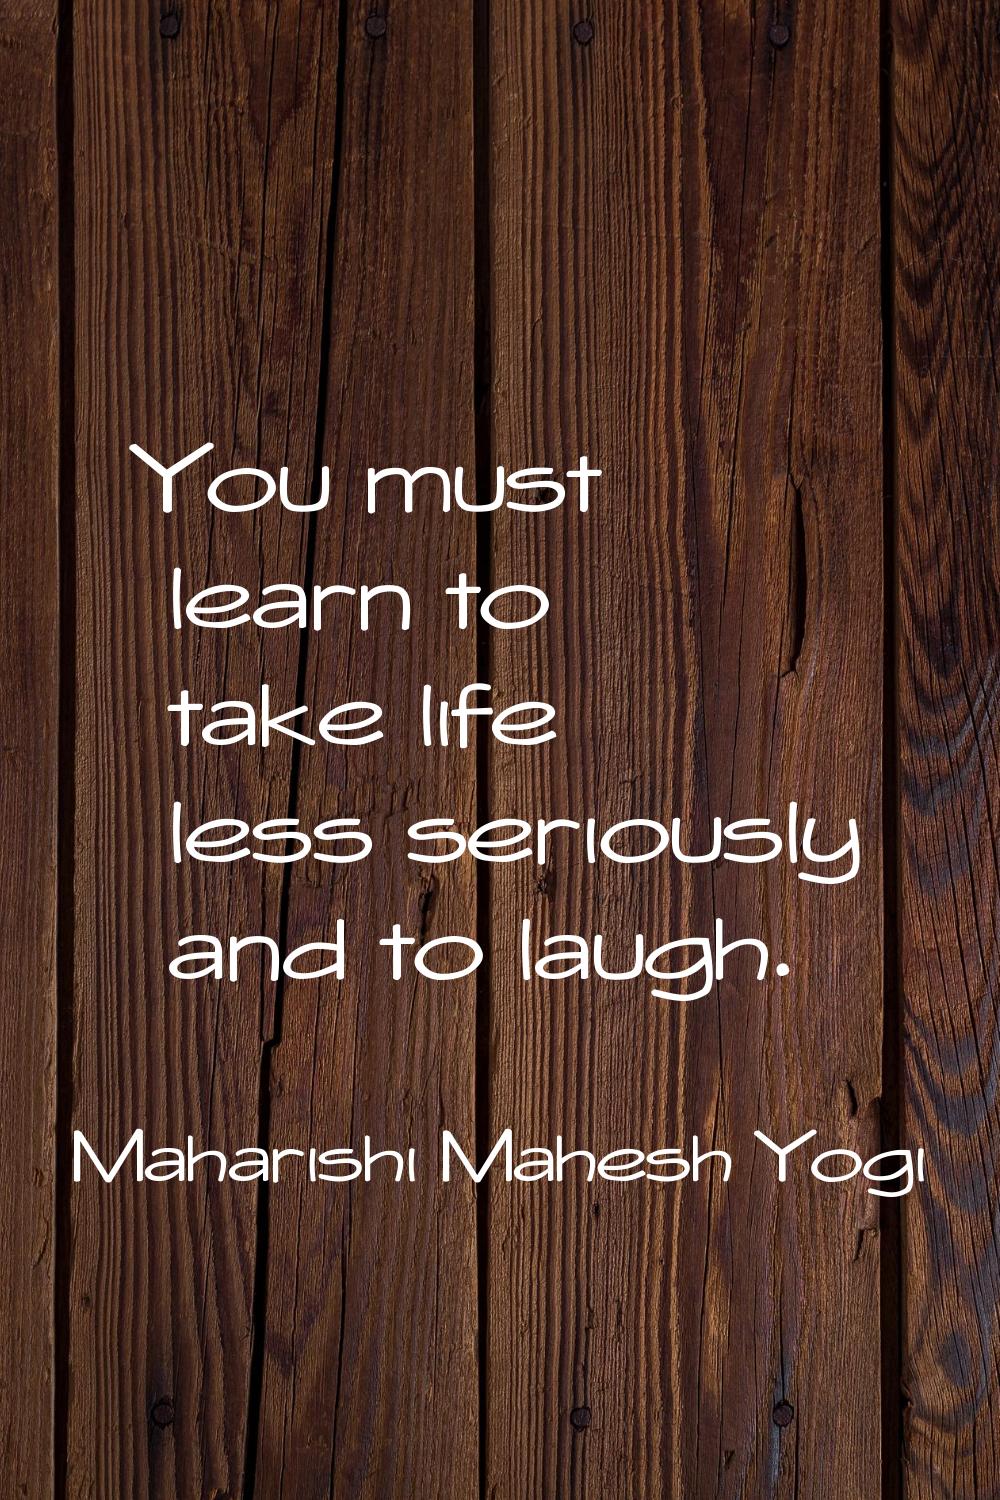 You must learn to take life less seriously and to laugh.